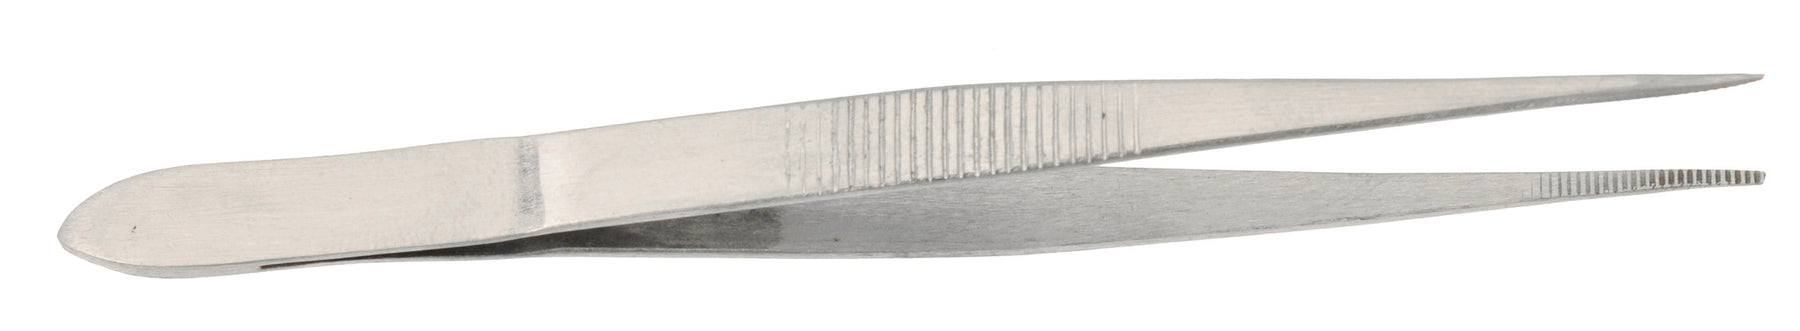 Forceps Pointed End